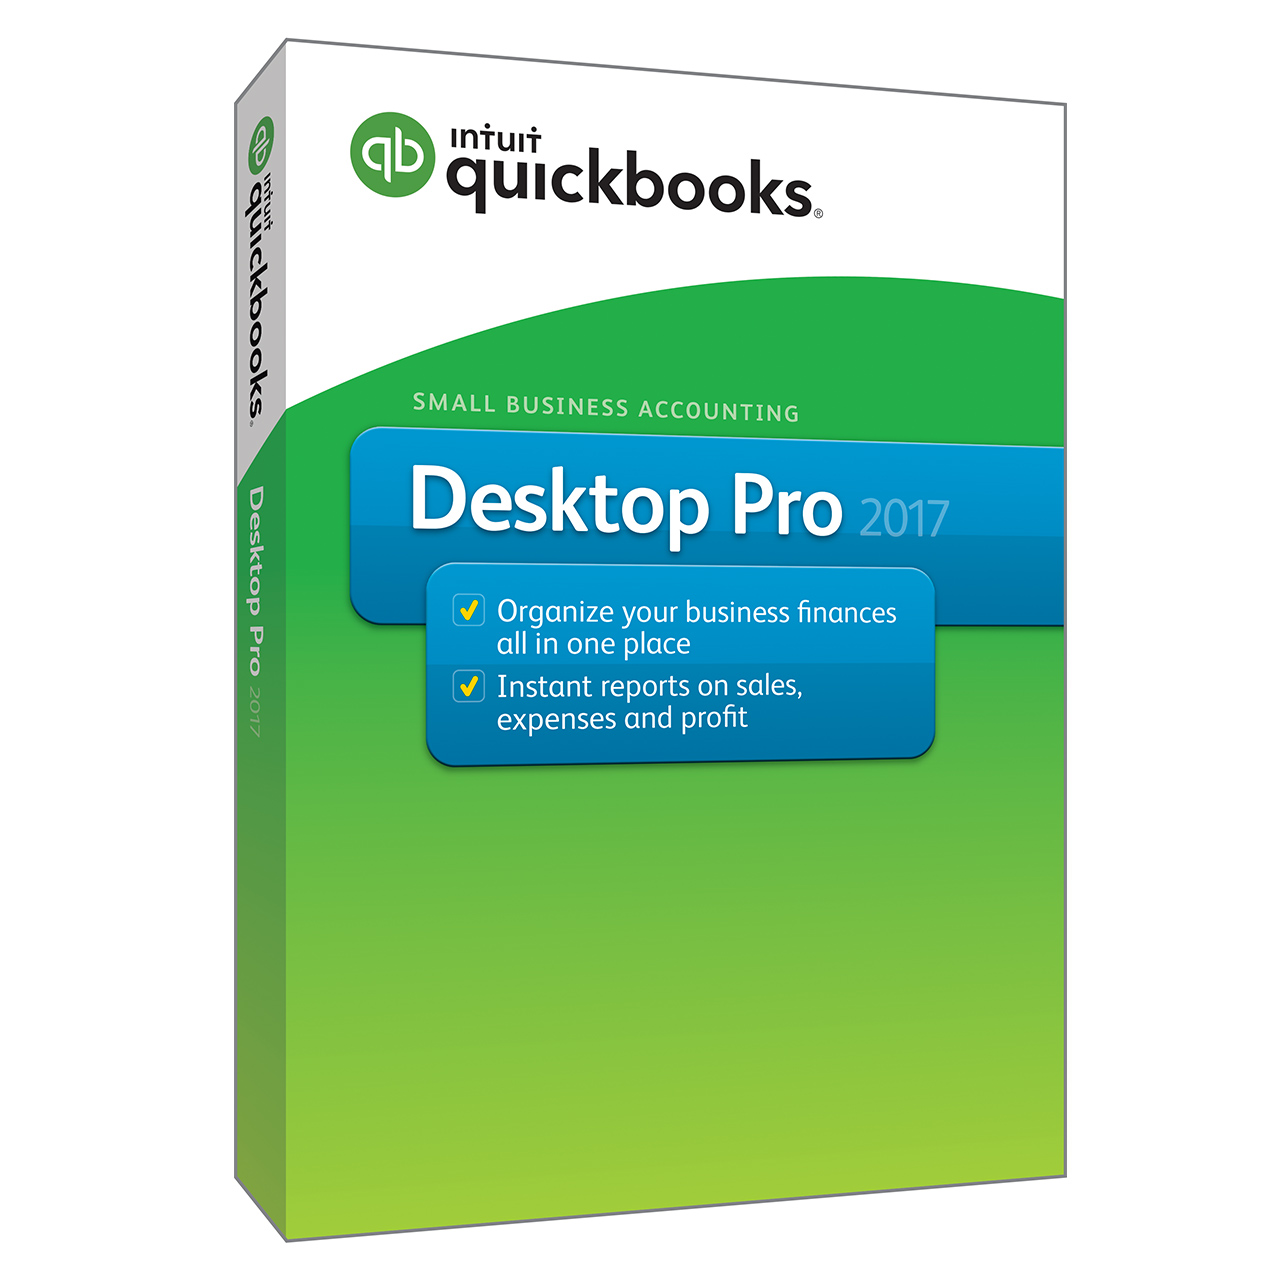 intuit quickbooks 2018 with licence